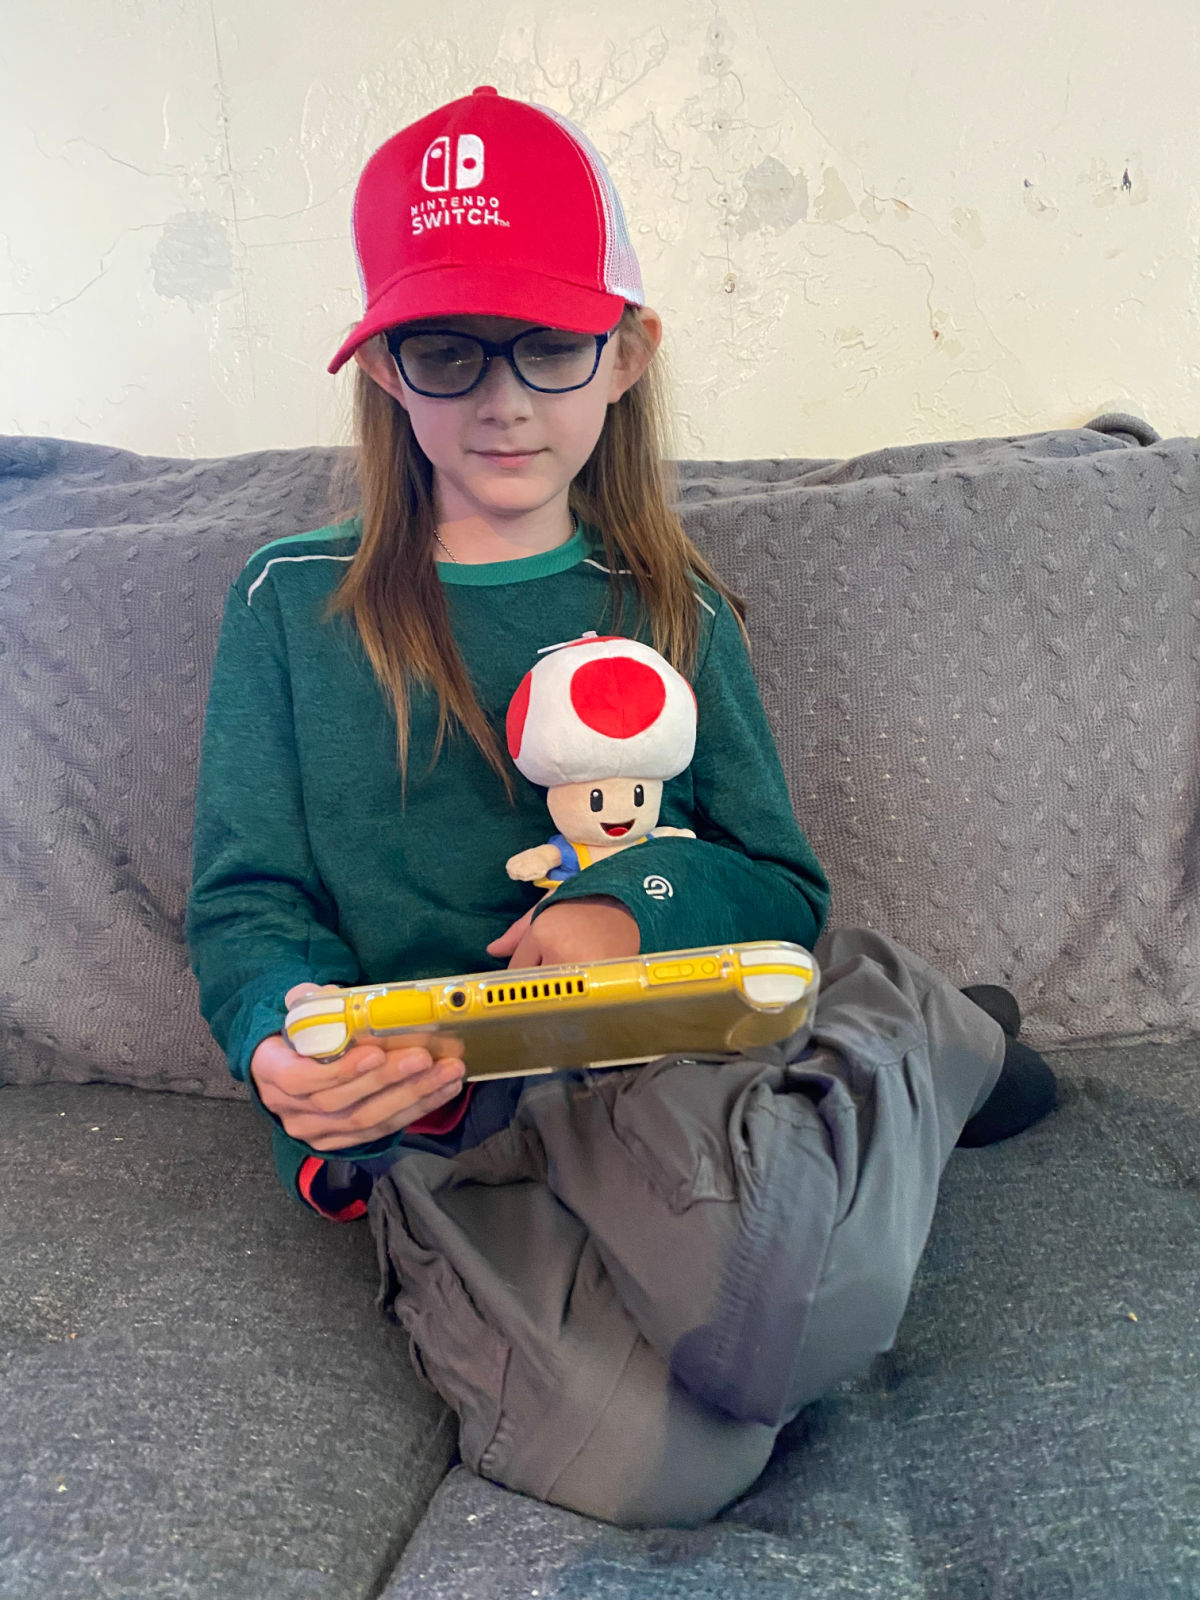 boy in green shirt wearing a red hat playing a yellow nintendo switch